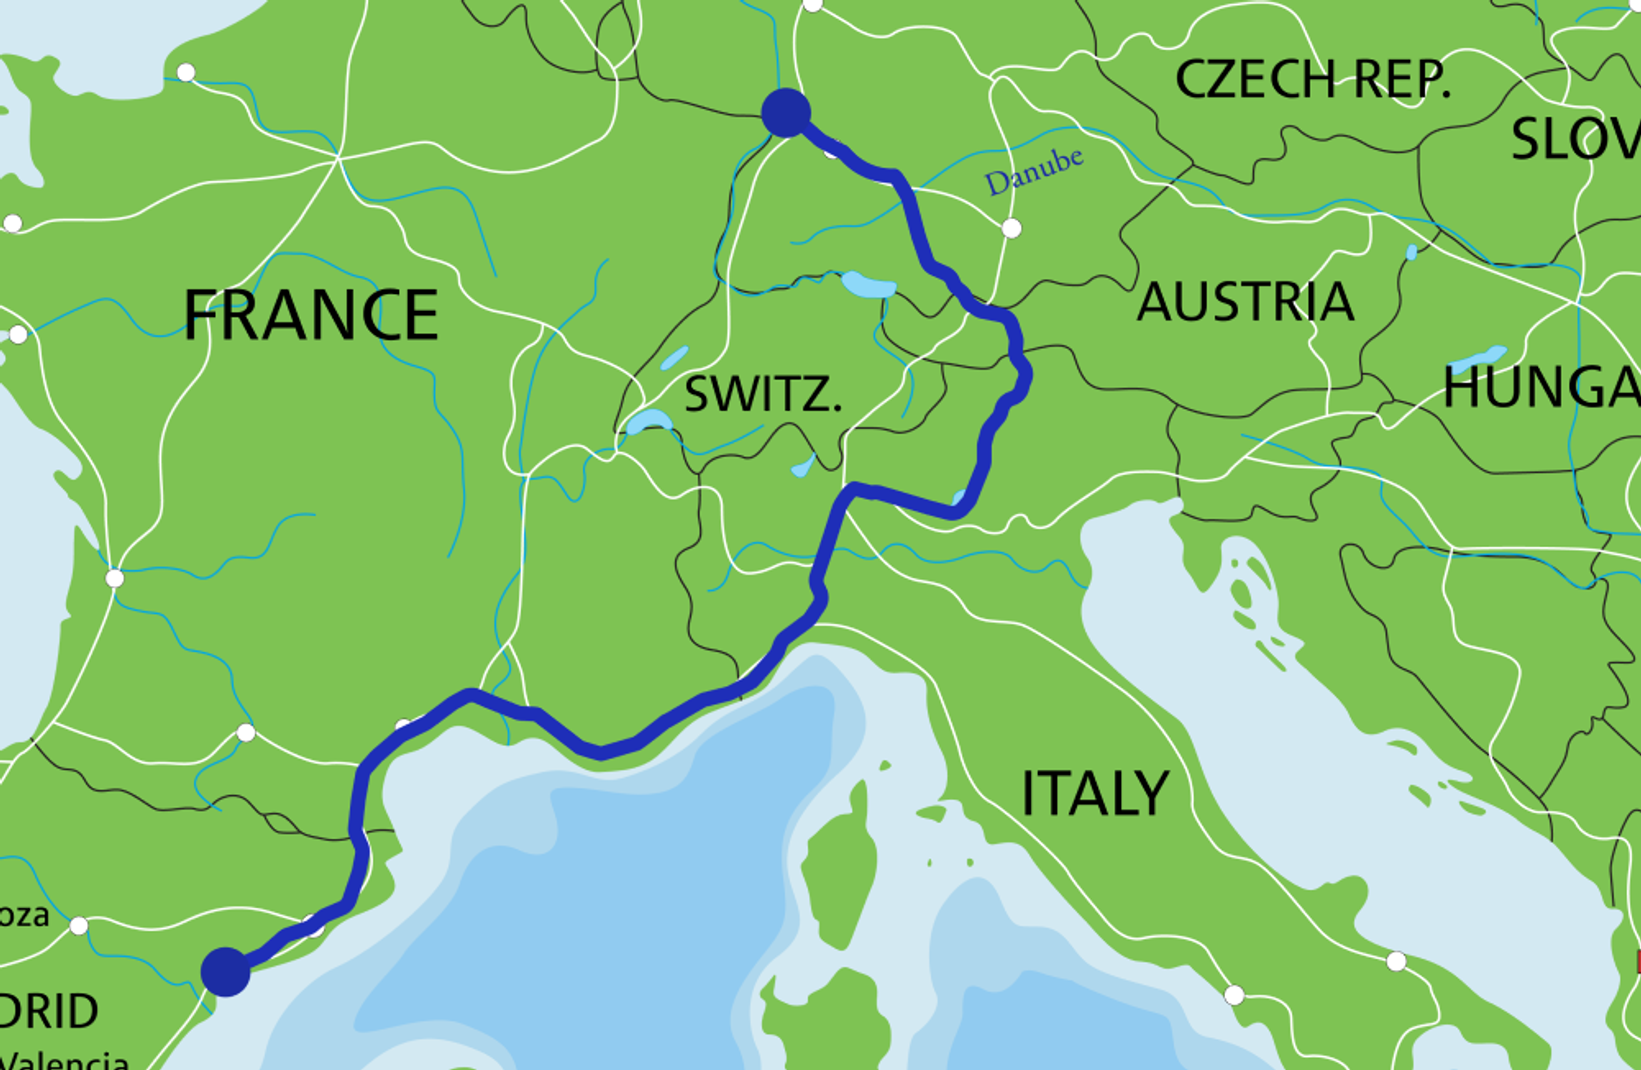 The 2,000-kilometer road trip passed through Spain, France, Monaco, Italy, Austria, and Germany.